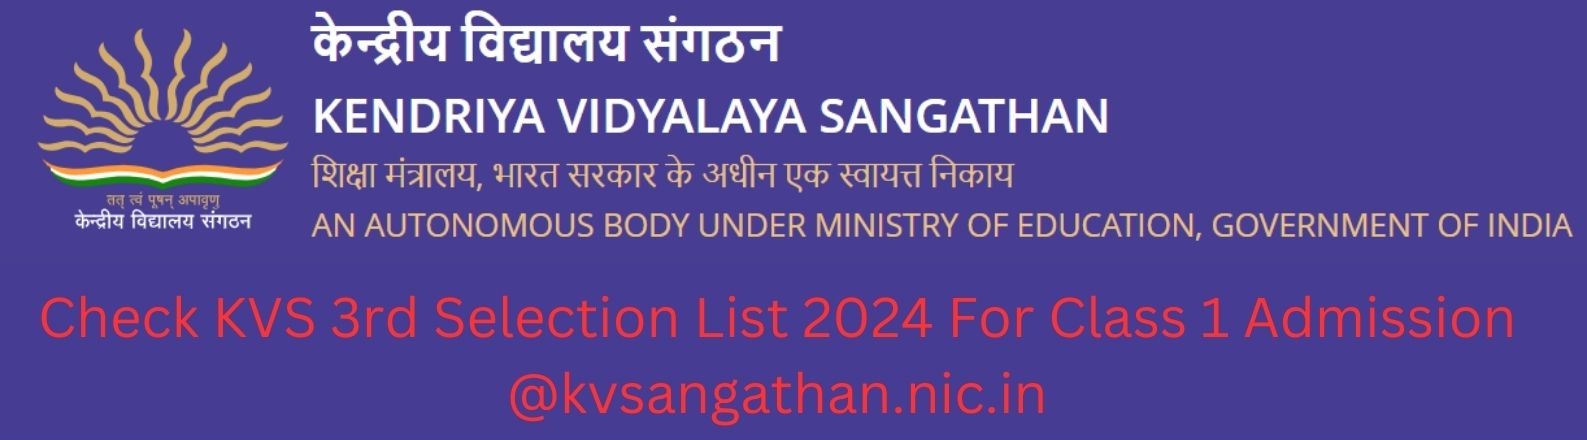 Check KVS 3rd Selection List 2024 For Class 1 Admission @kvsangathan.nic.in